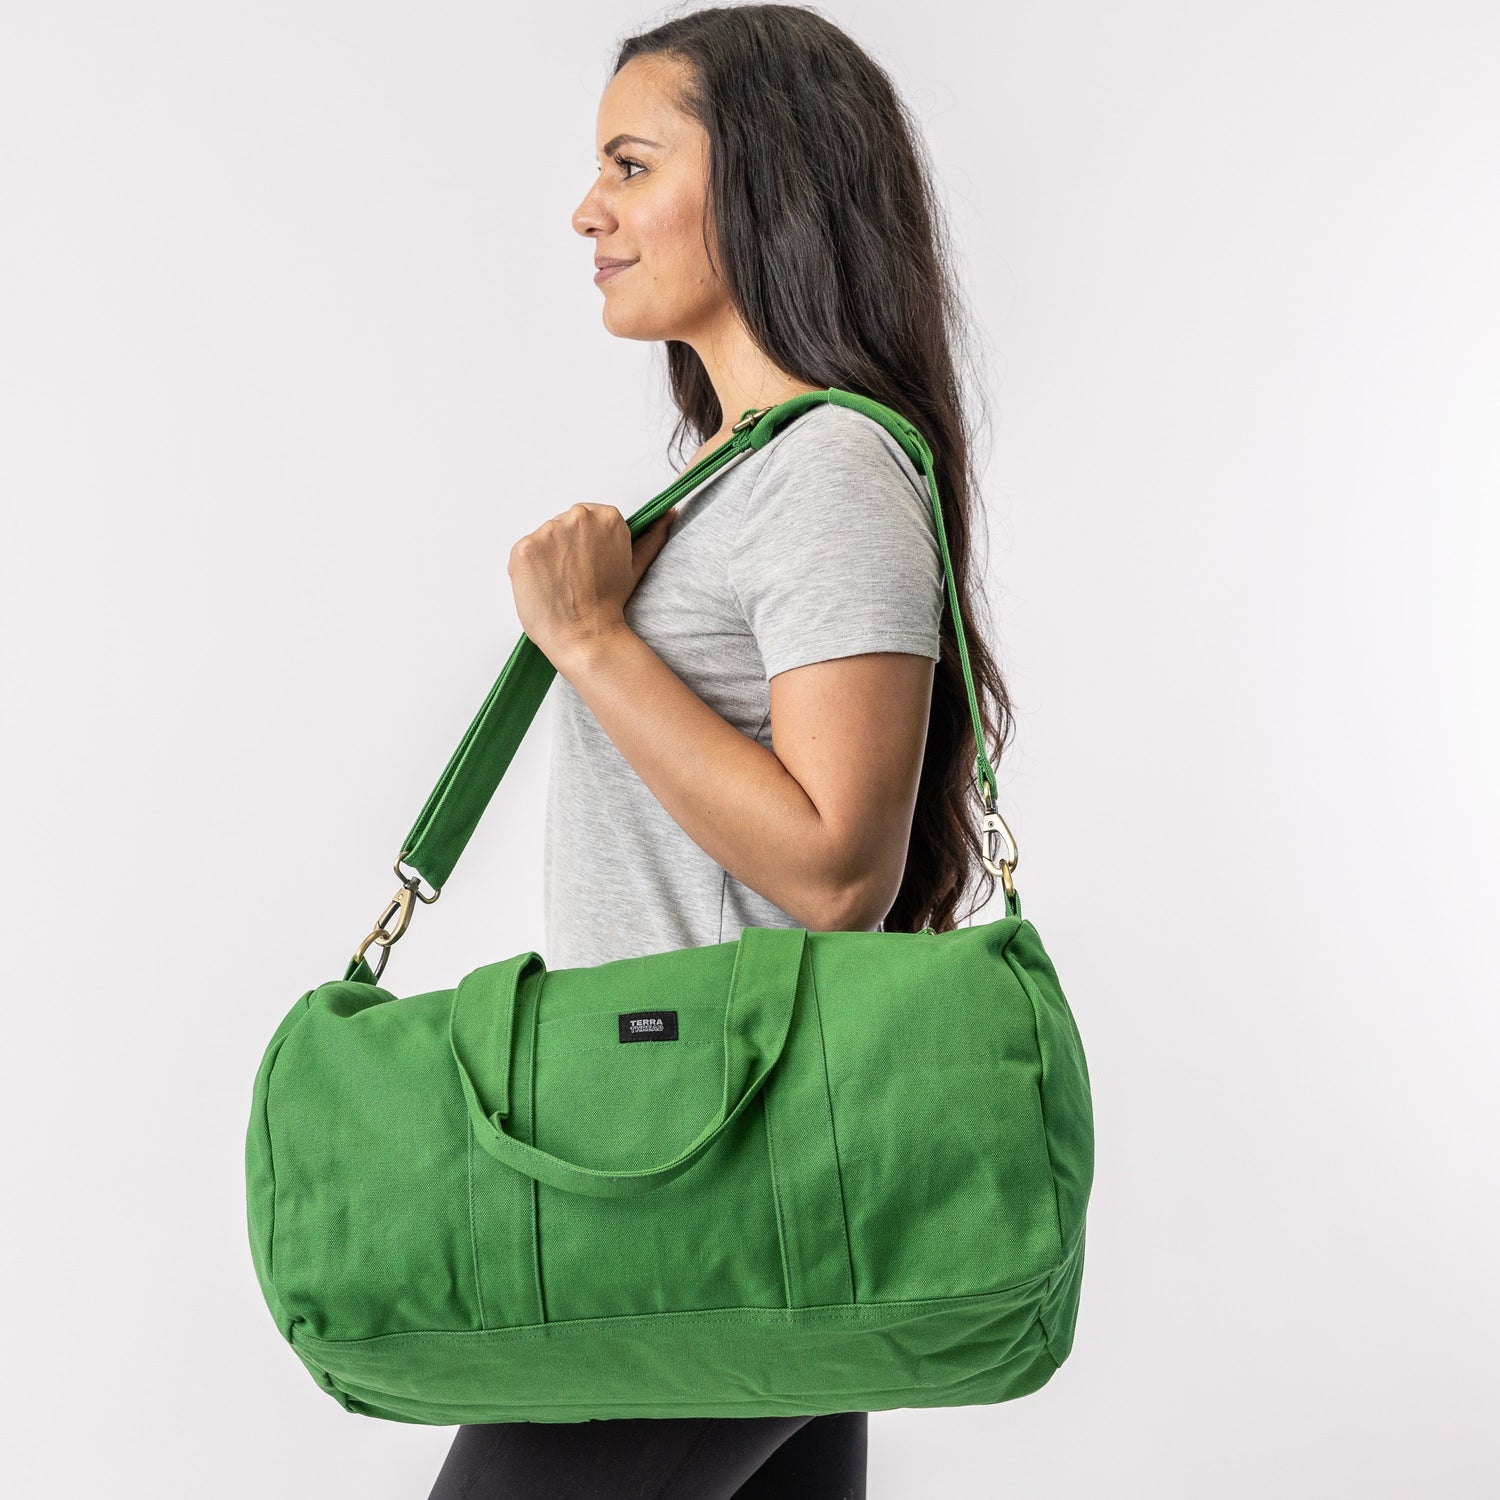 Sustainable Duffle Bag Organic and Fairtrade Certified – Terra Thread